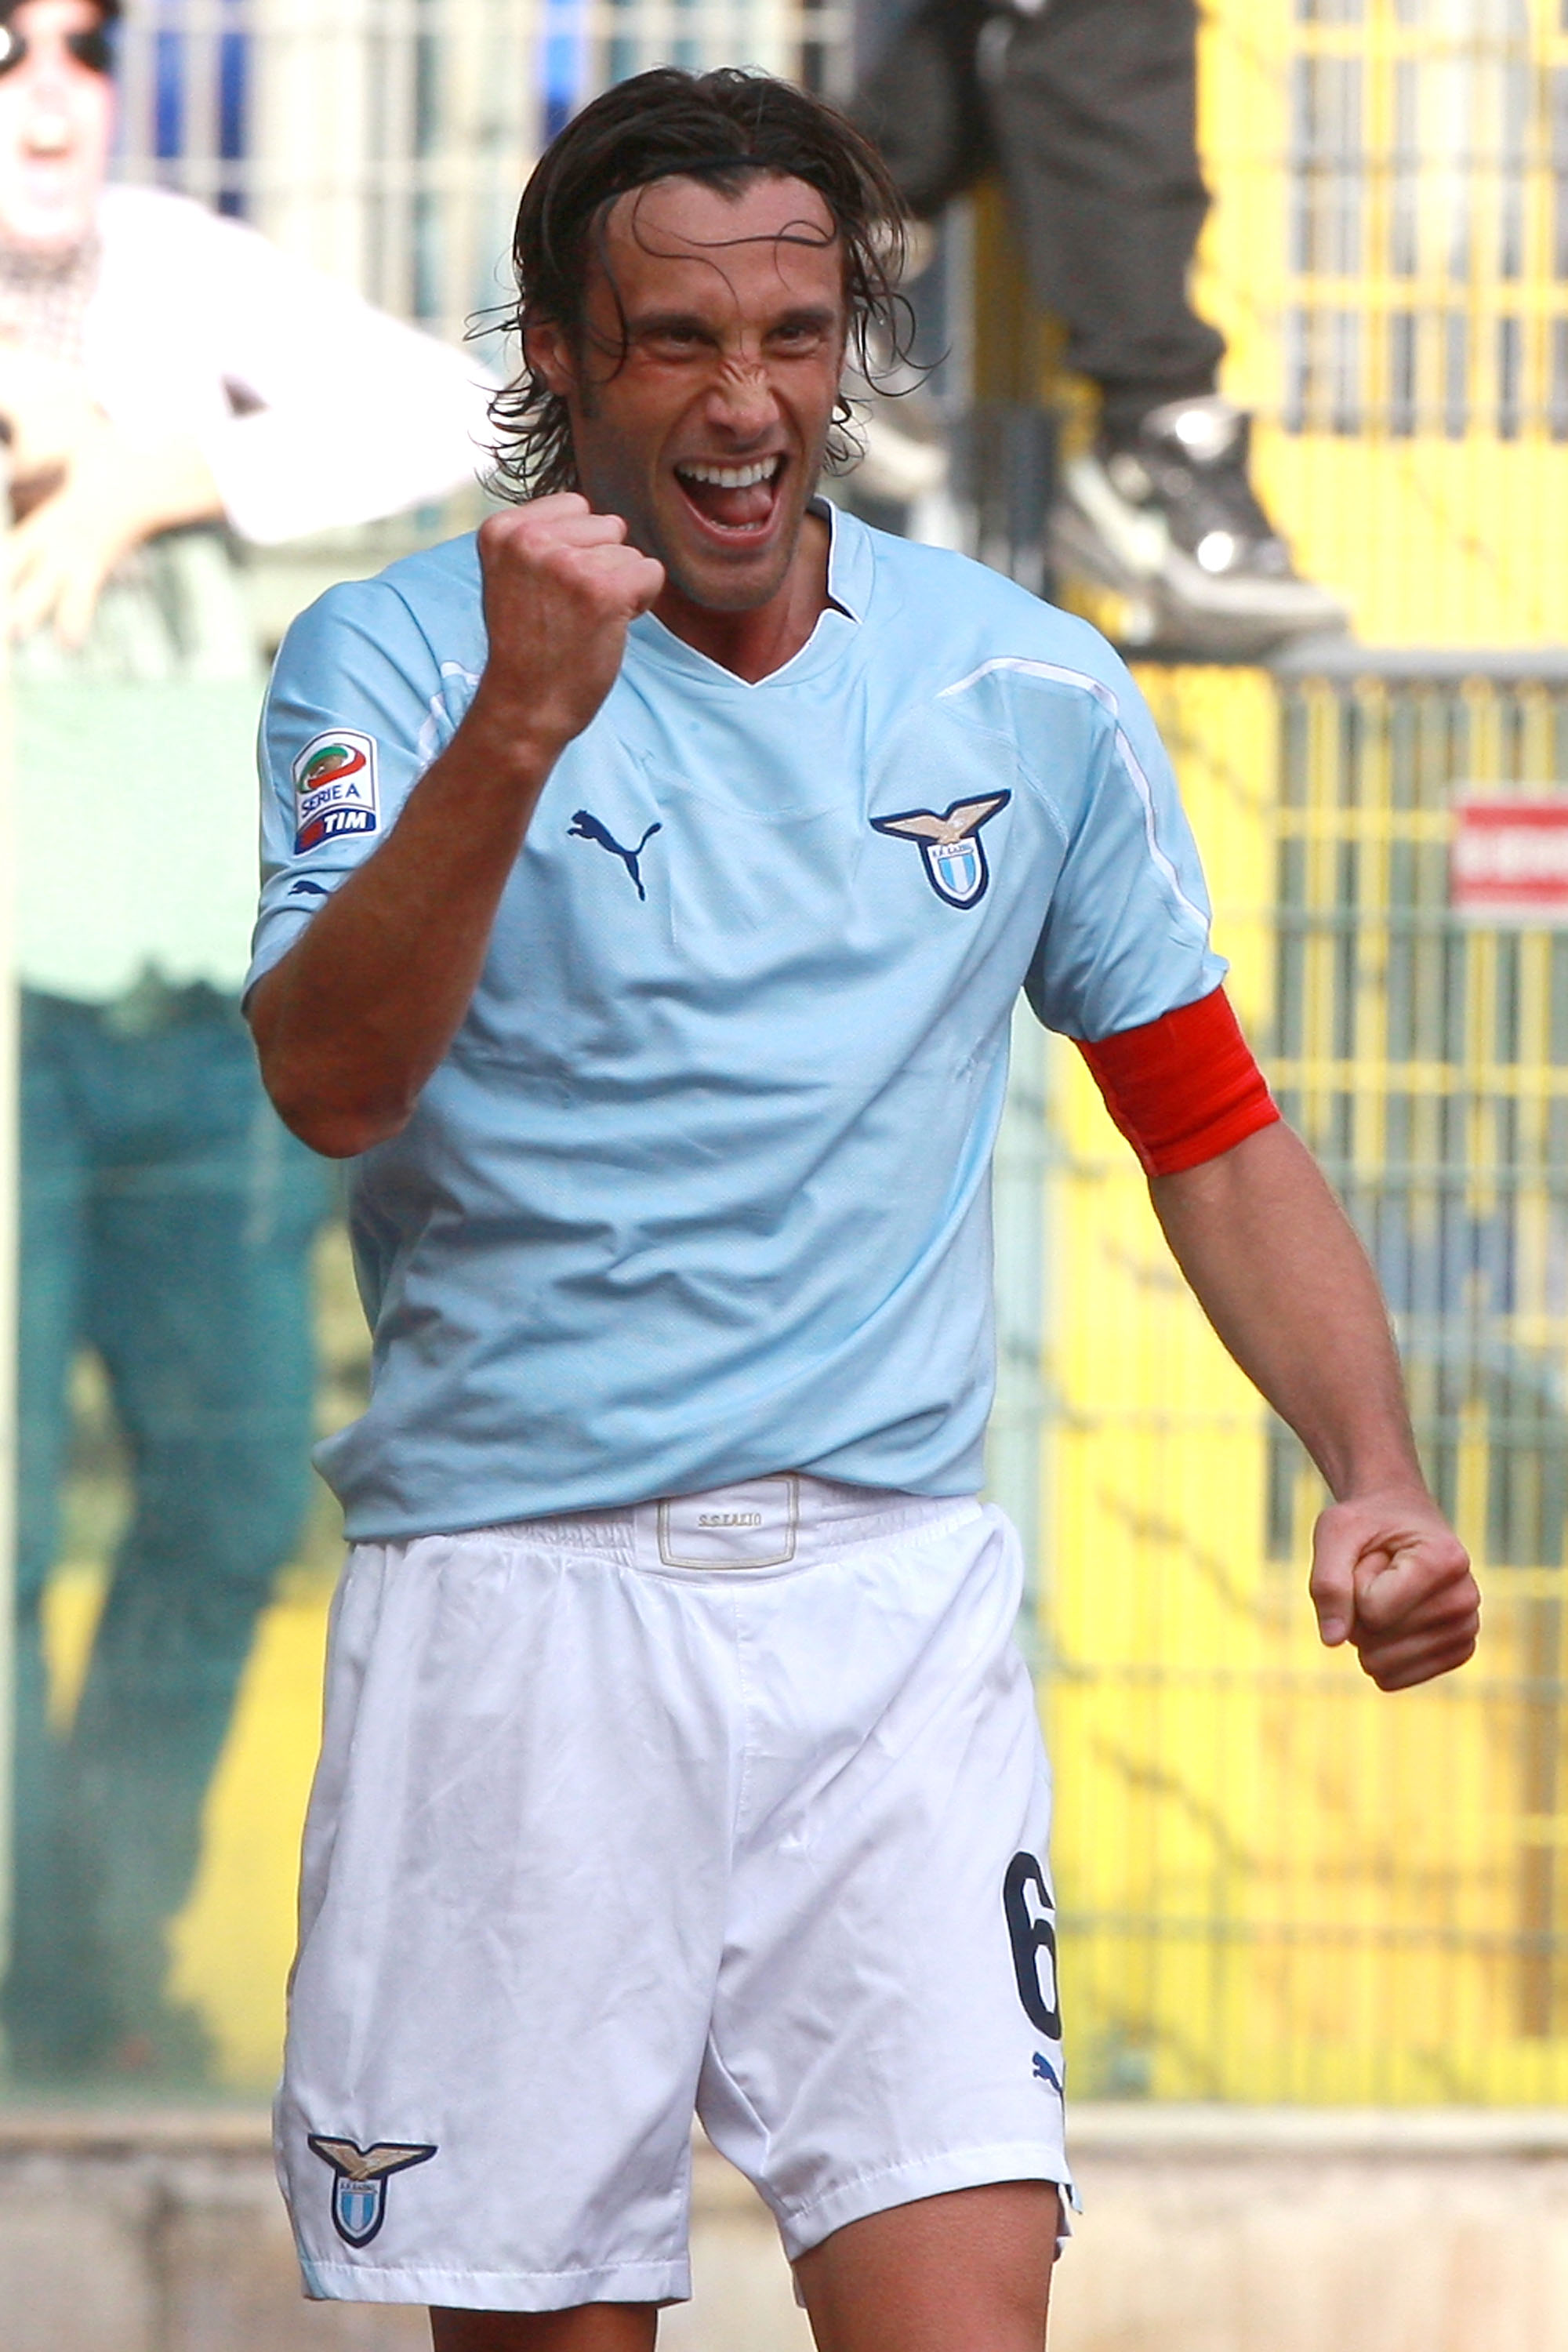 Stefano Mauri scored what turned out to be the game winner for Lazio.